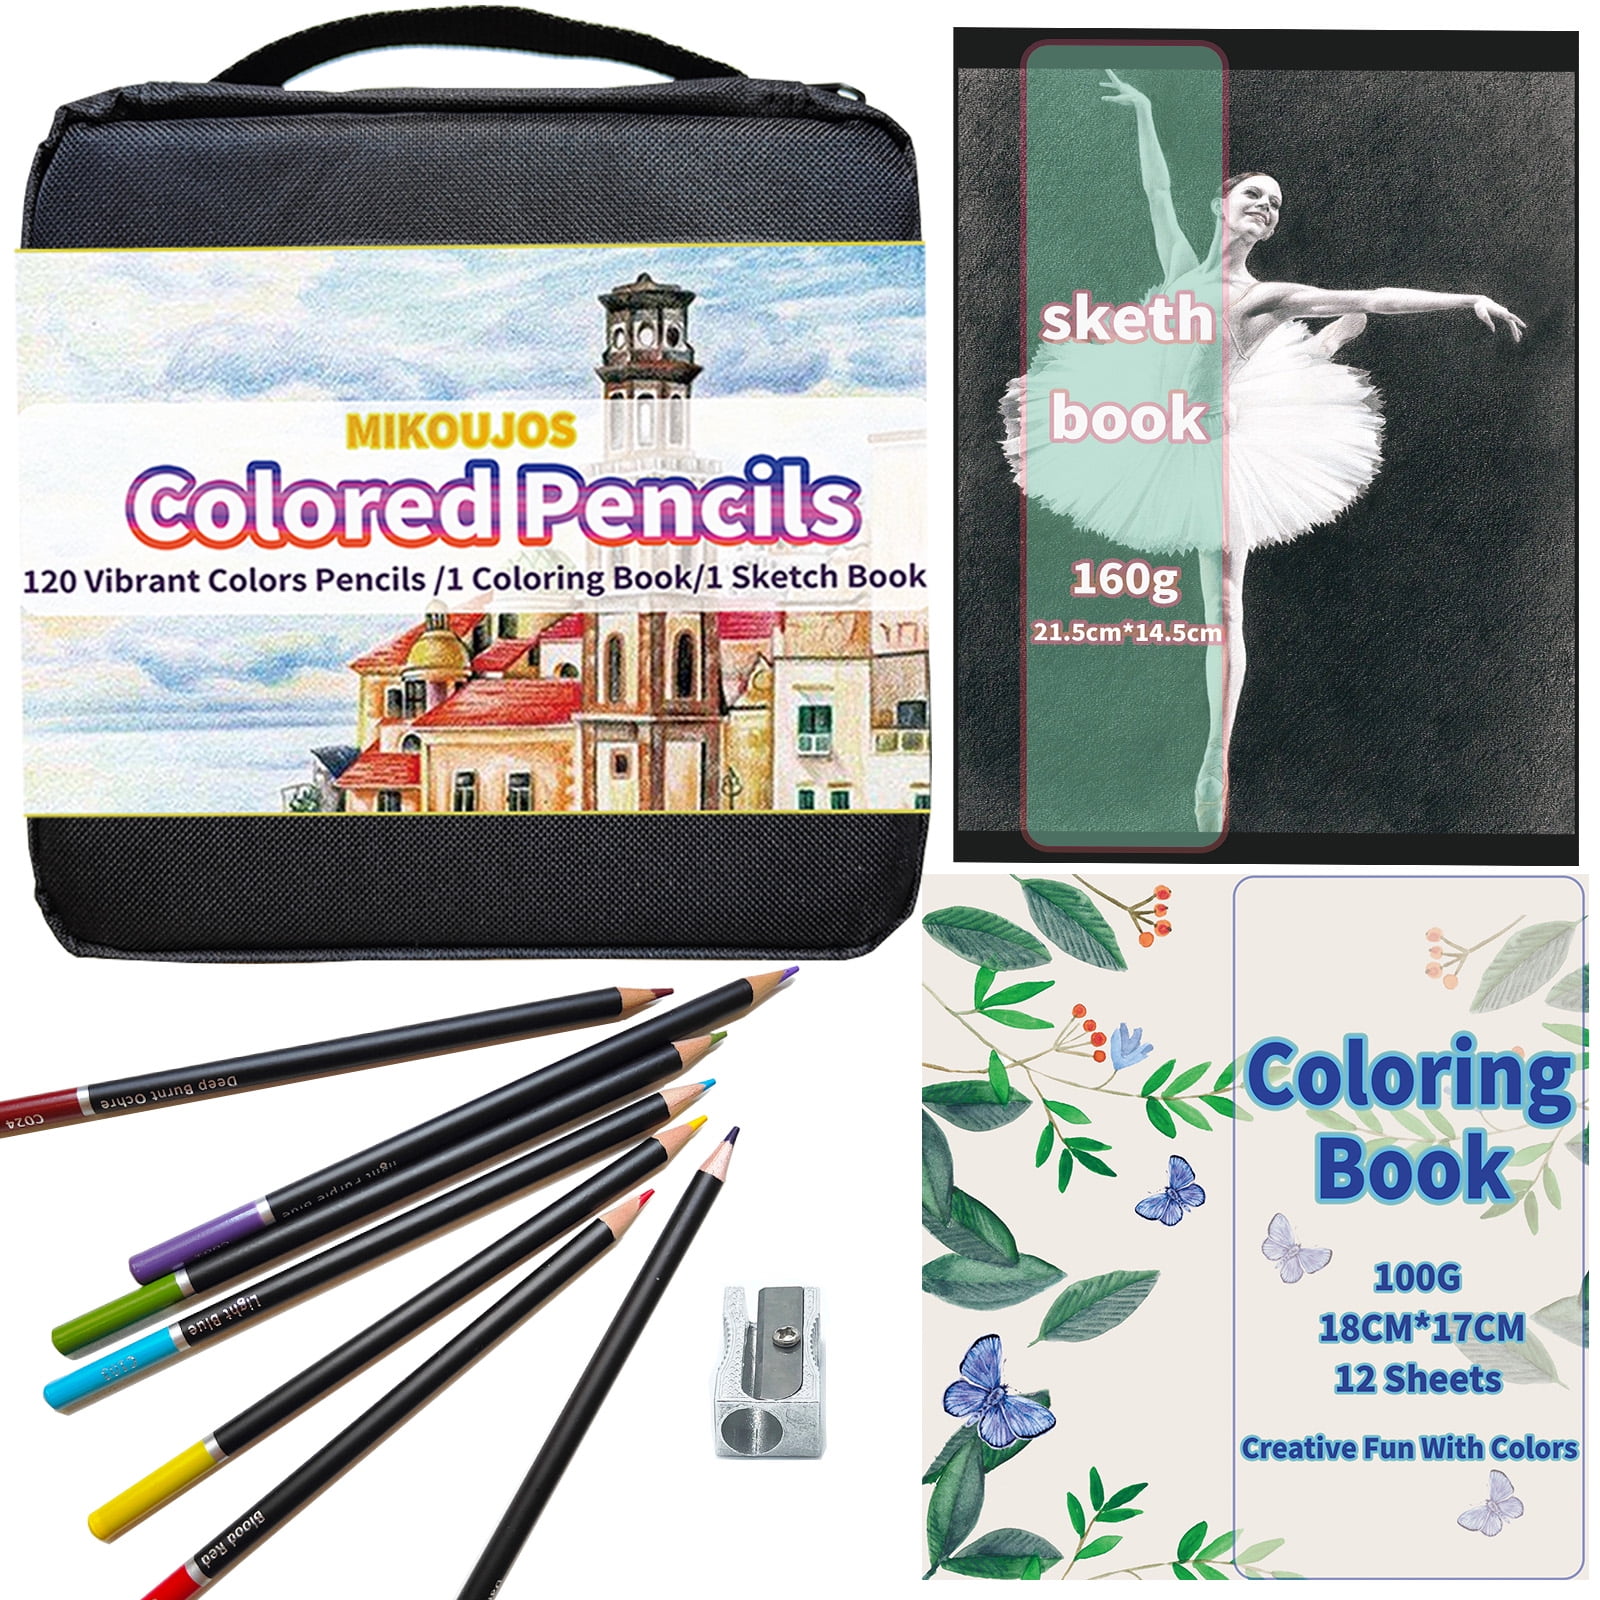 HINTUNG Professional Colouring Pencils for Adults Colouring Books Artist  Pack of 72 Coloured Pencils Perfect for Student or Children School Art